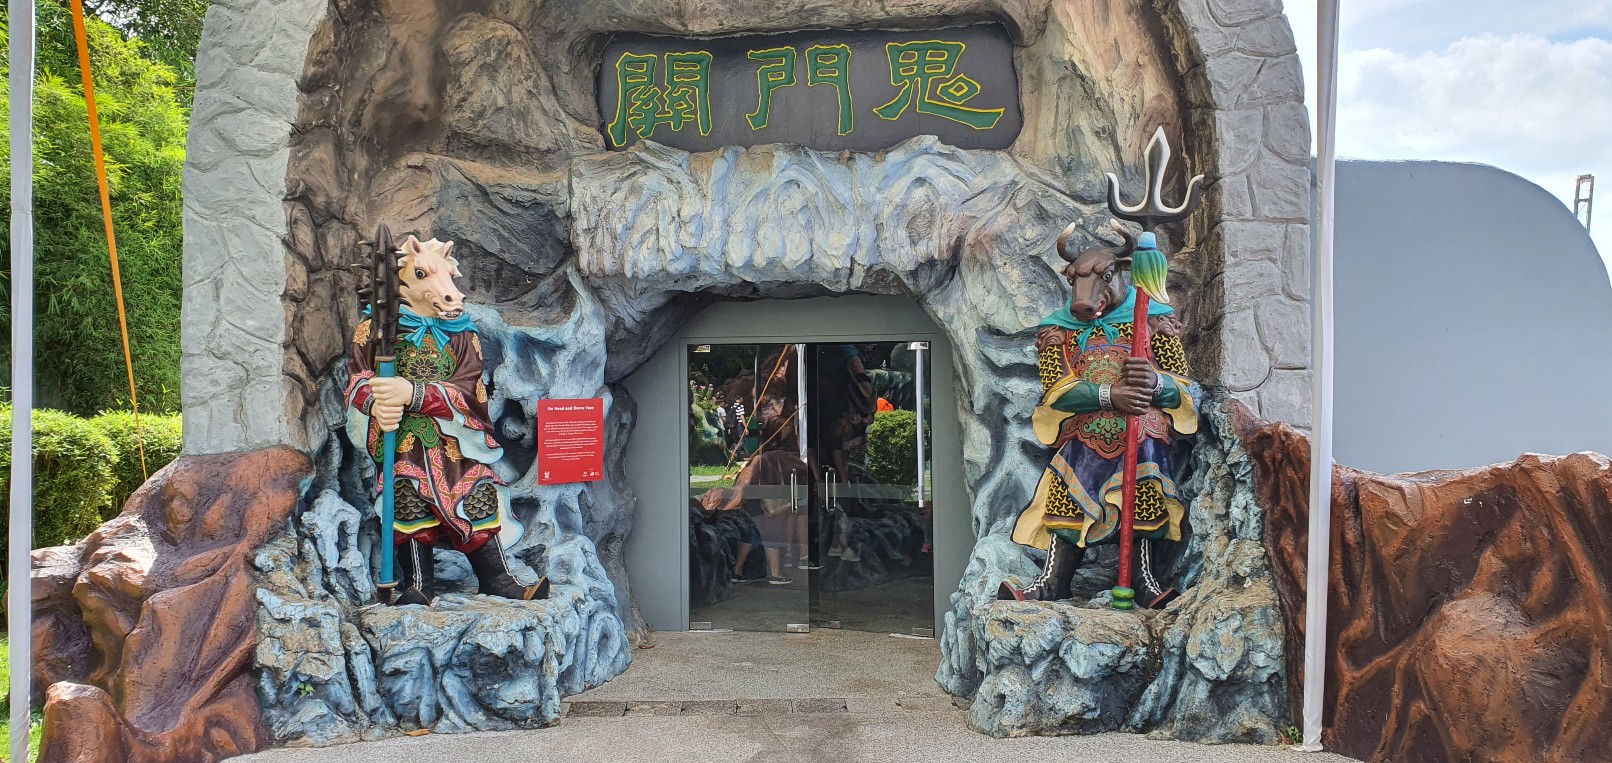 Ten courts of Hell’s Museum at Haw Par Villa